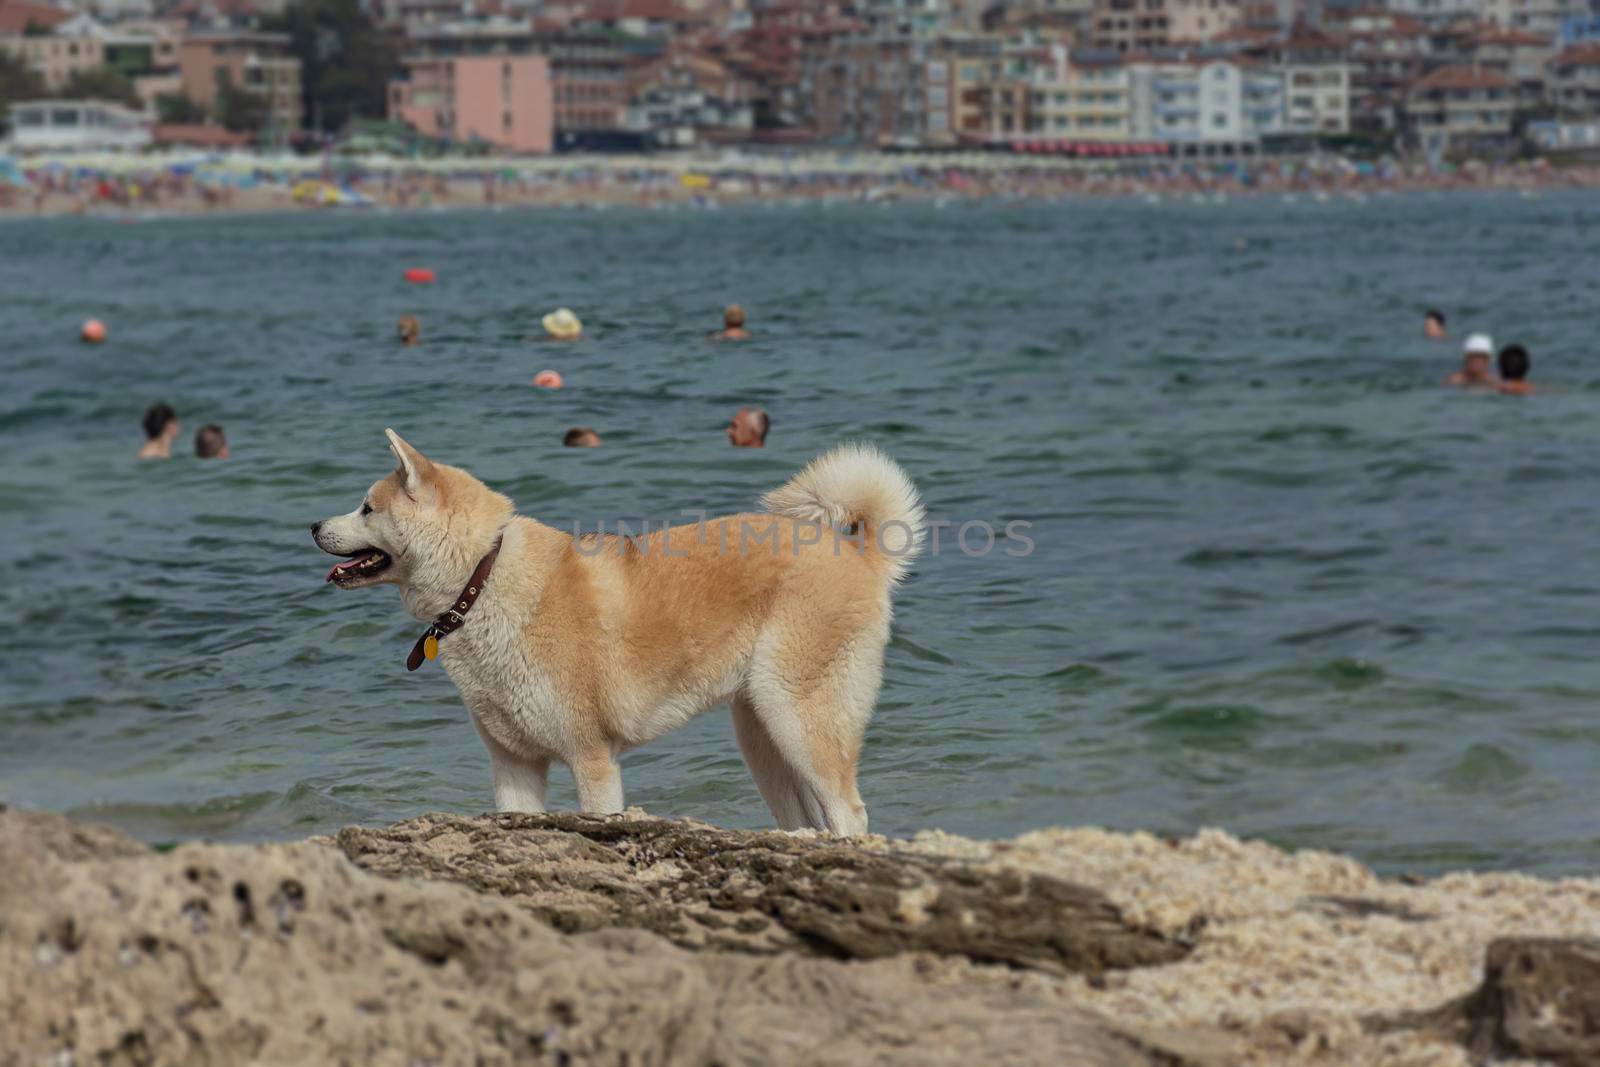 dog stands on the rocks against the background of the sea and the city, blurred background. Stock photo.